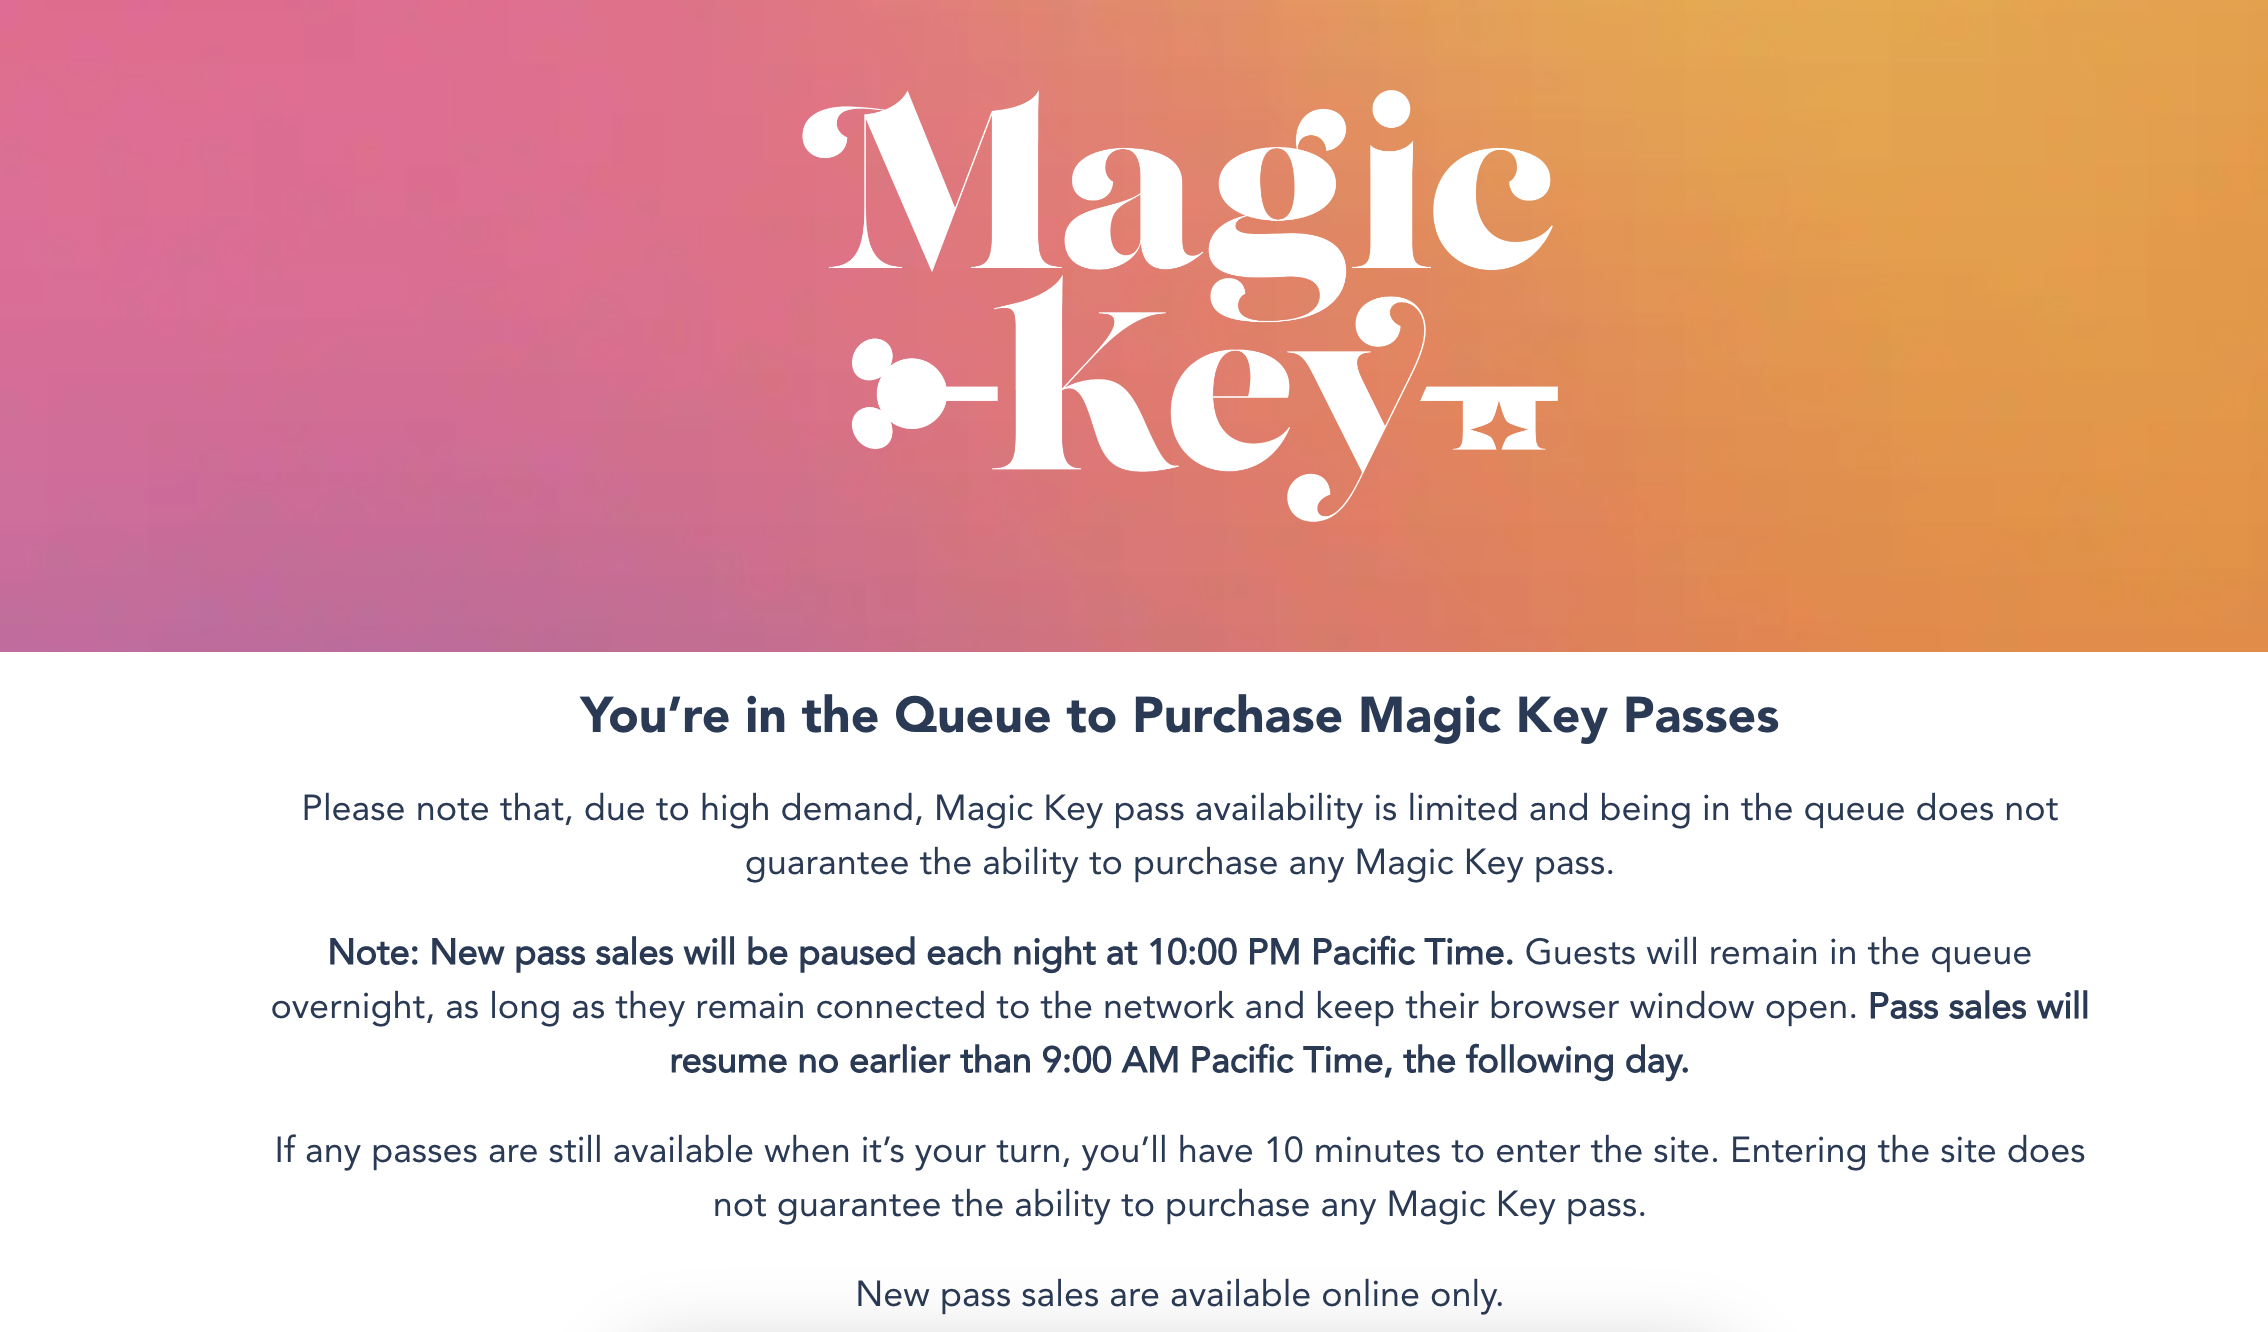 ACT FAST. ALL Magic Key Passes Are on Sale for Disneyland Resort! the